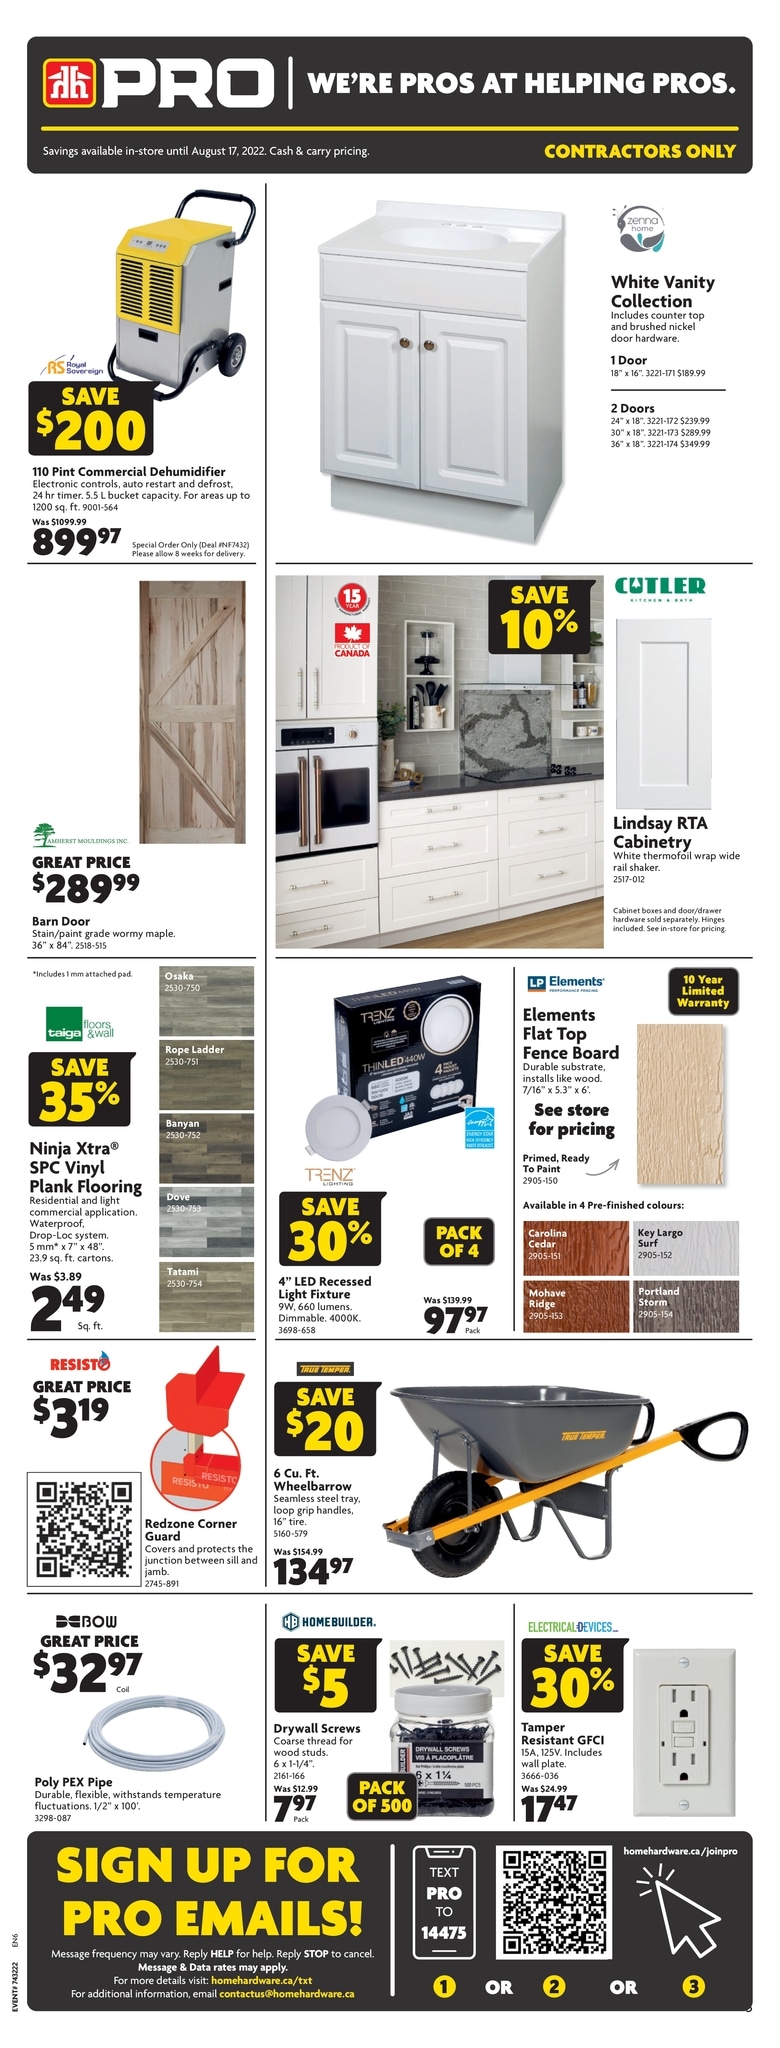 Home Hardware - PRO - Page 2